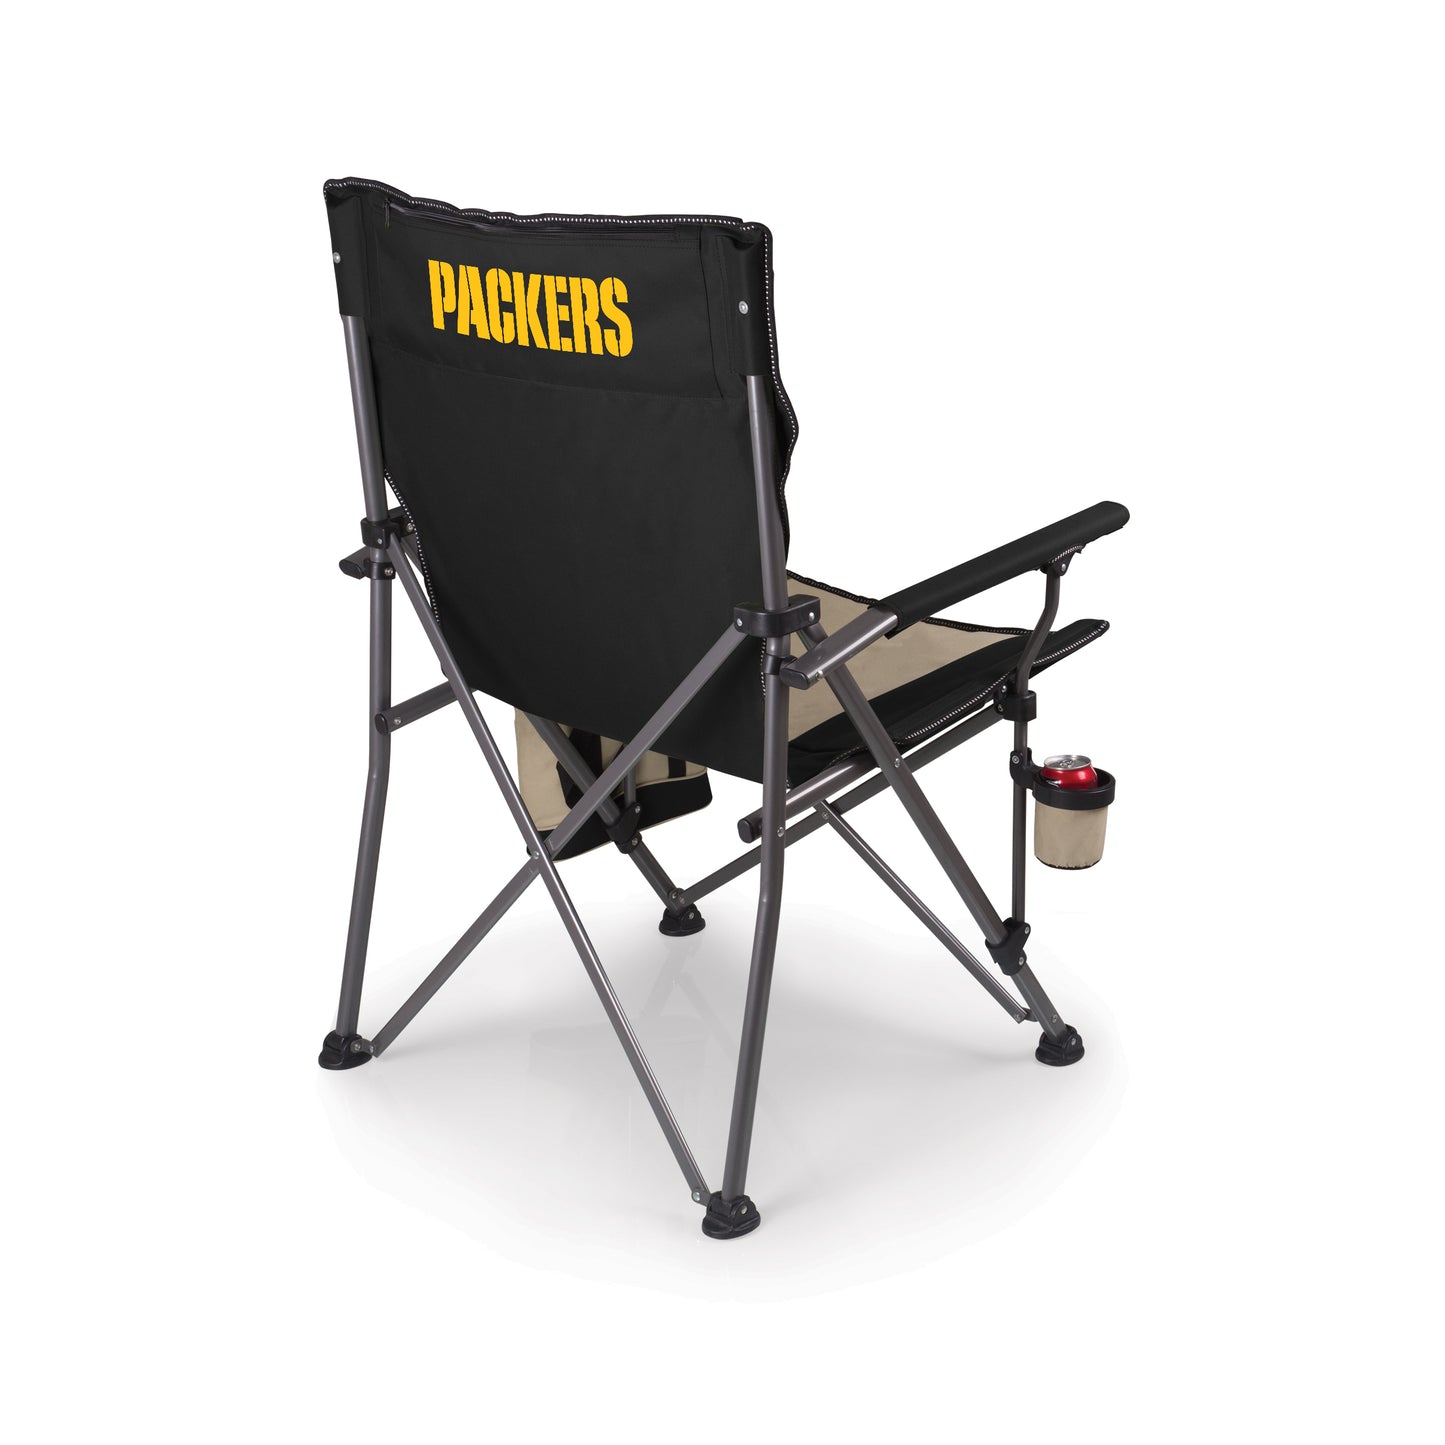 Green Bay Packers - Big Bear XL Camp Chair with Cooler